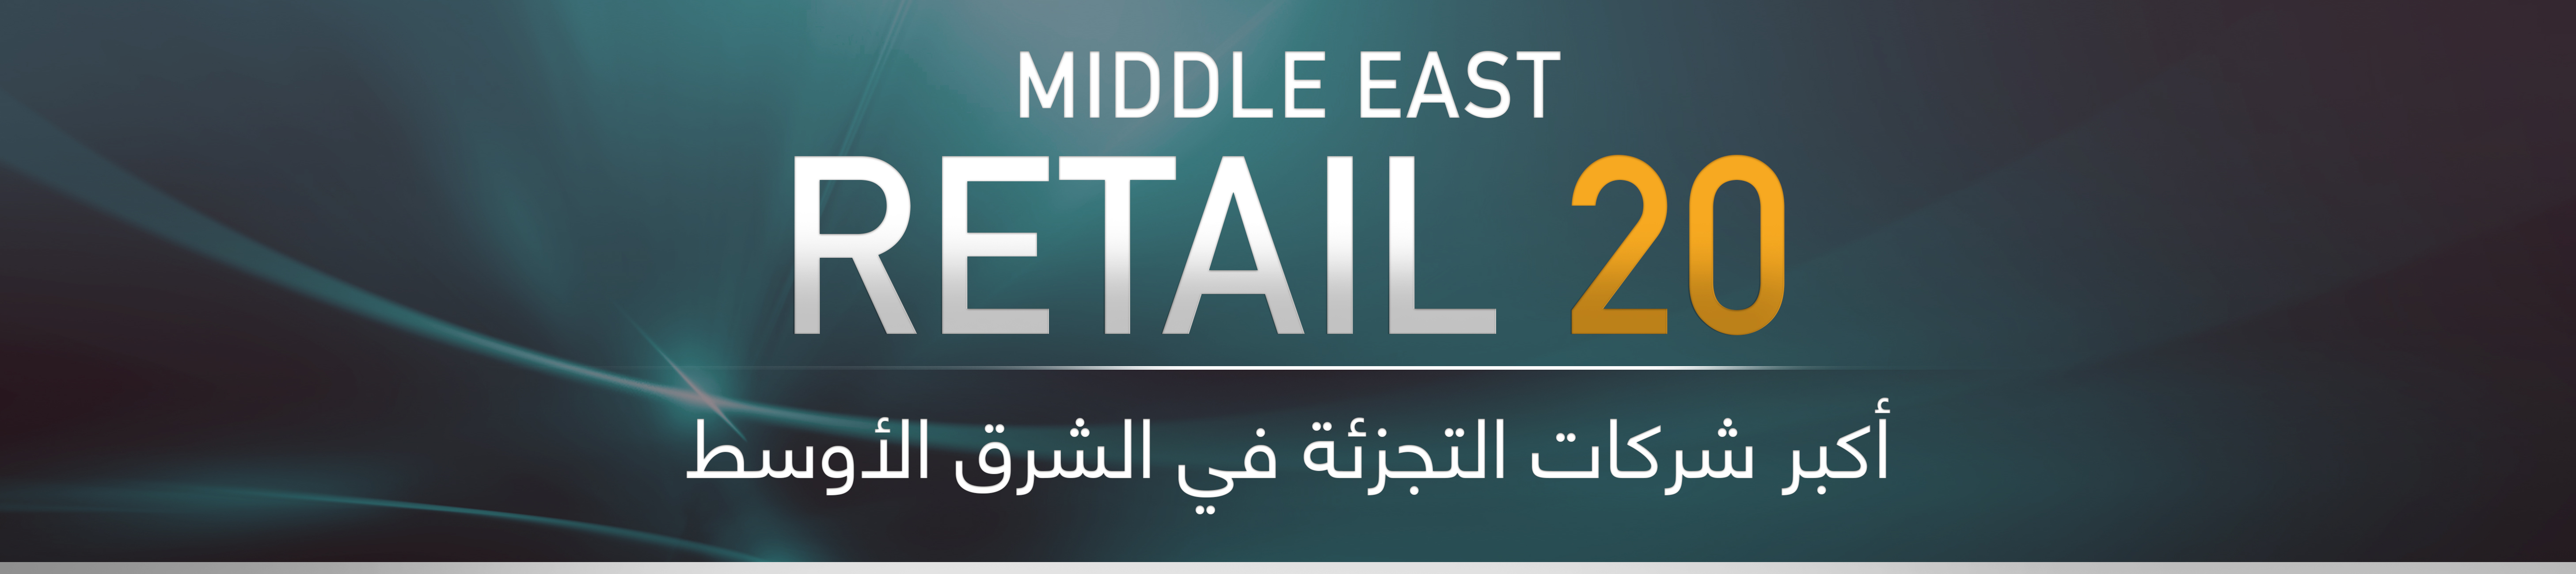 The Largest Retail Chains In The Middle East